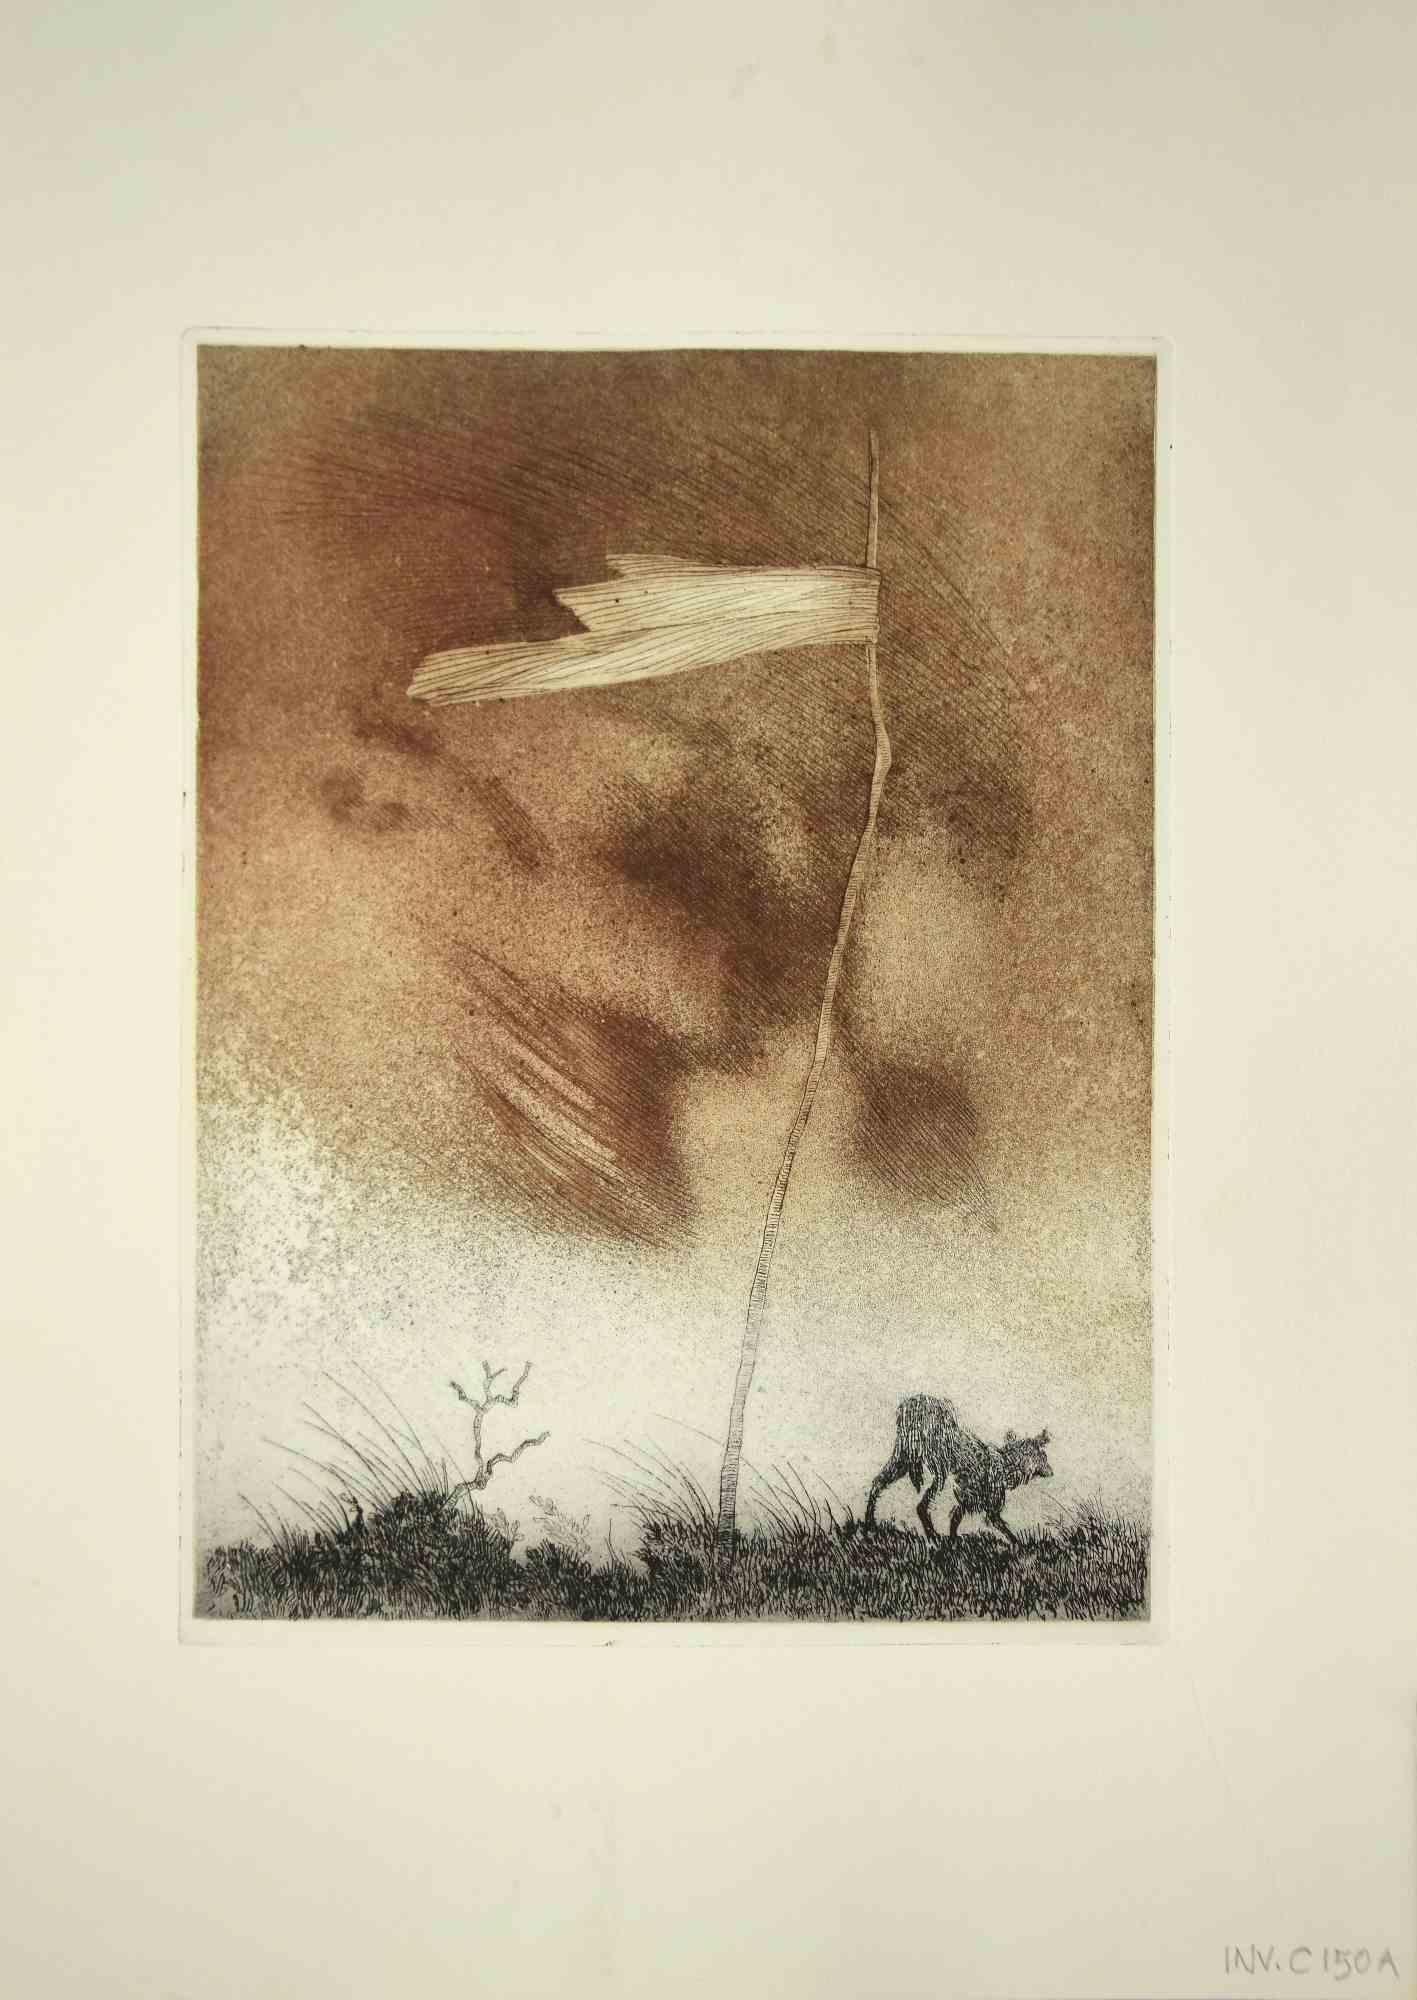 The boundary is an original etching print realized by Leo Guida in the 1970s.

Good condition.

Leo Guida  (1992 - 2017). Sensitive to current issues, artistic movements and historical techniques, Leo Guida has been able to weave with many